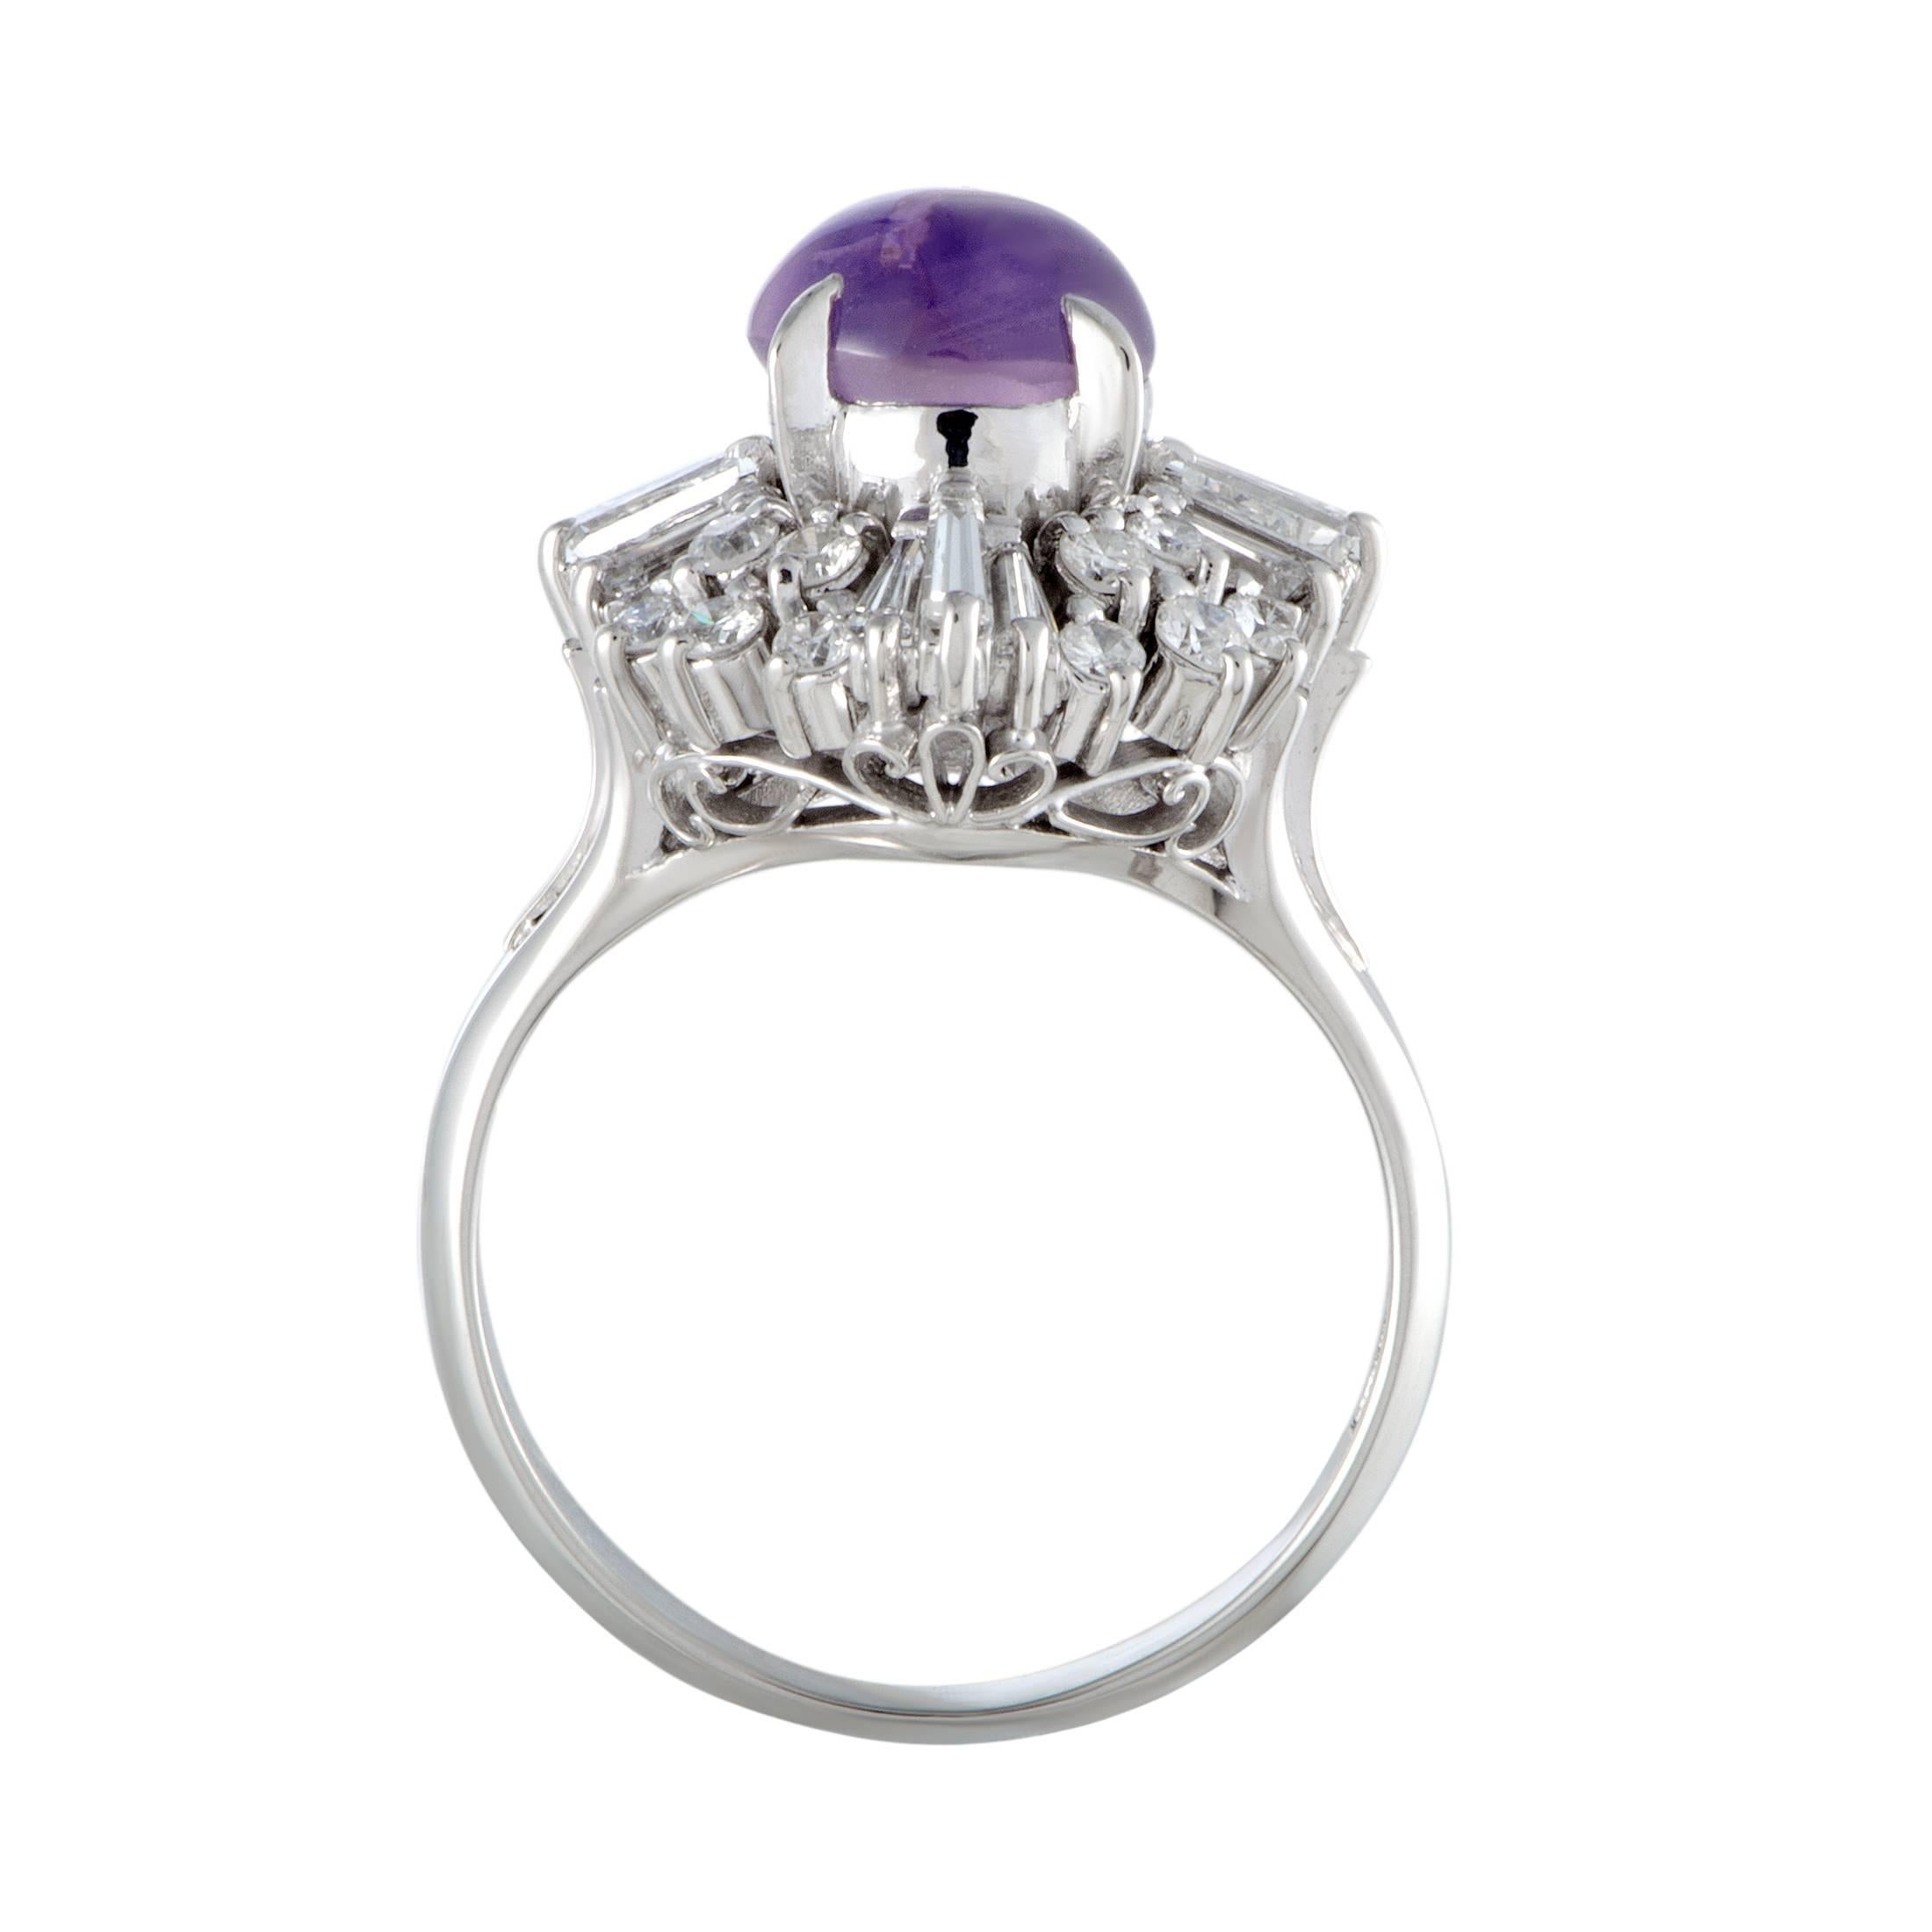 The incredibly luxurious diamonds and the splendid purple sapphire create a sublime visual effect in this gorgeous ring that is wonderfully made of the ever-prestigious platinum. The diamonds weigh in total 0.84 carats while the sapphire weighs 3.15